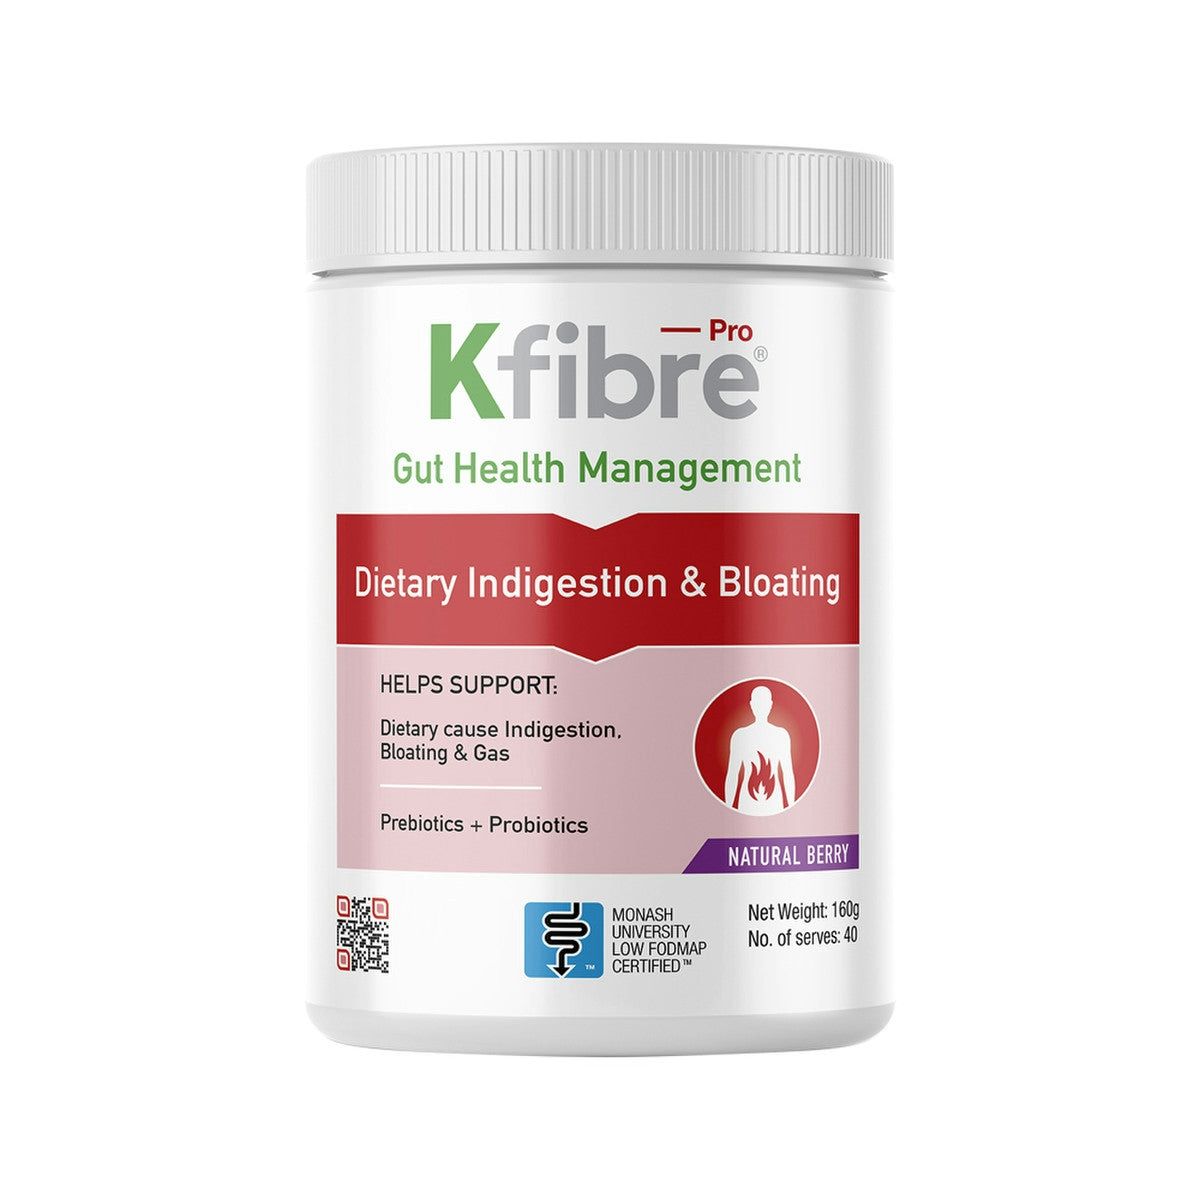 image of Kfibre Pro Dietary Indigestion & Bloating Natural Berry Tub 160g with white background